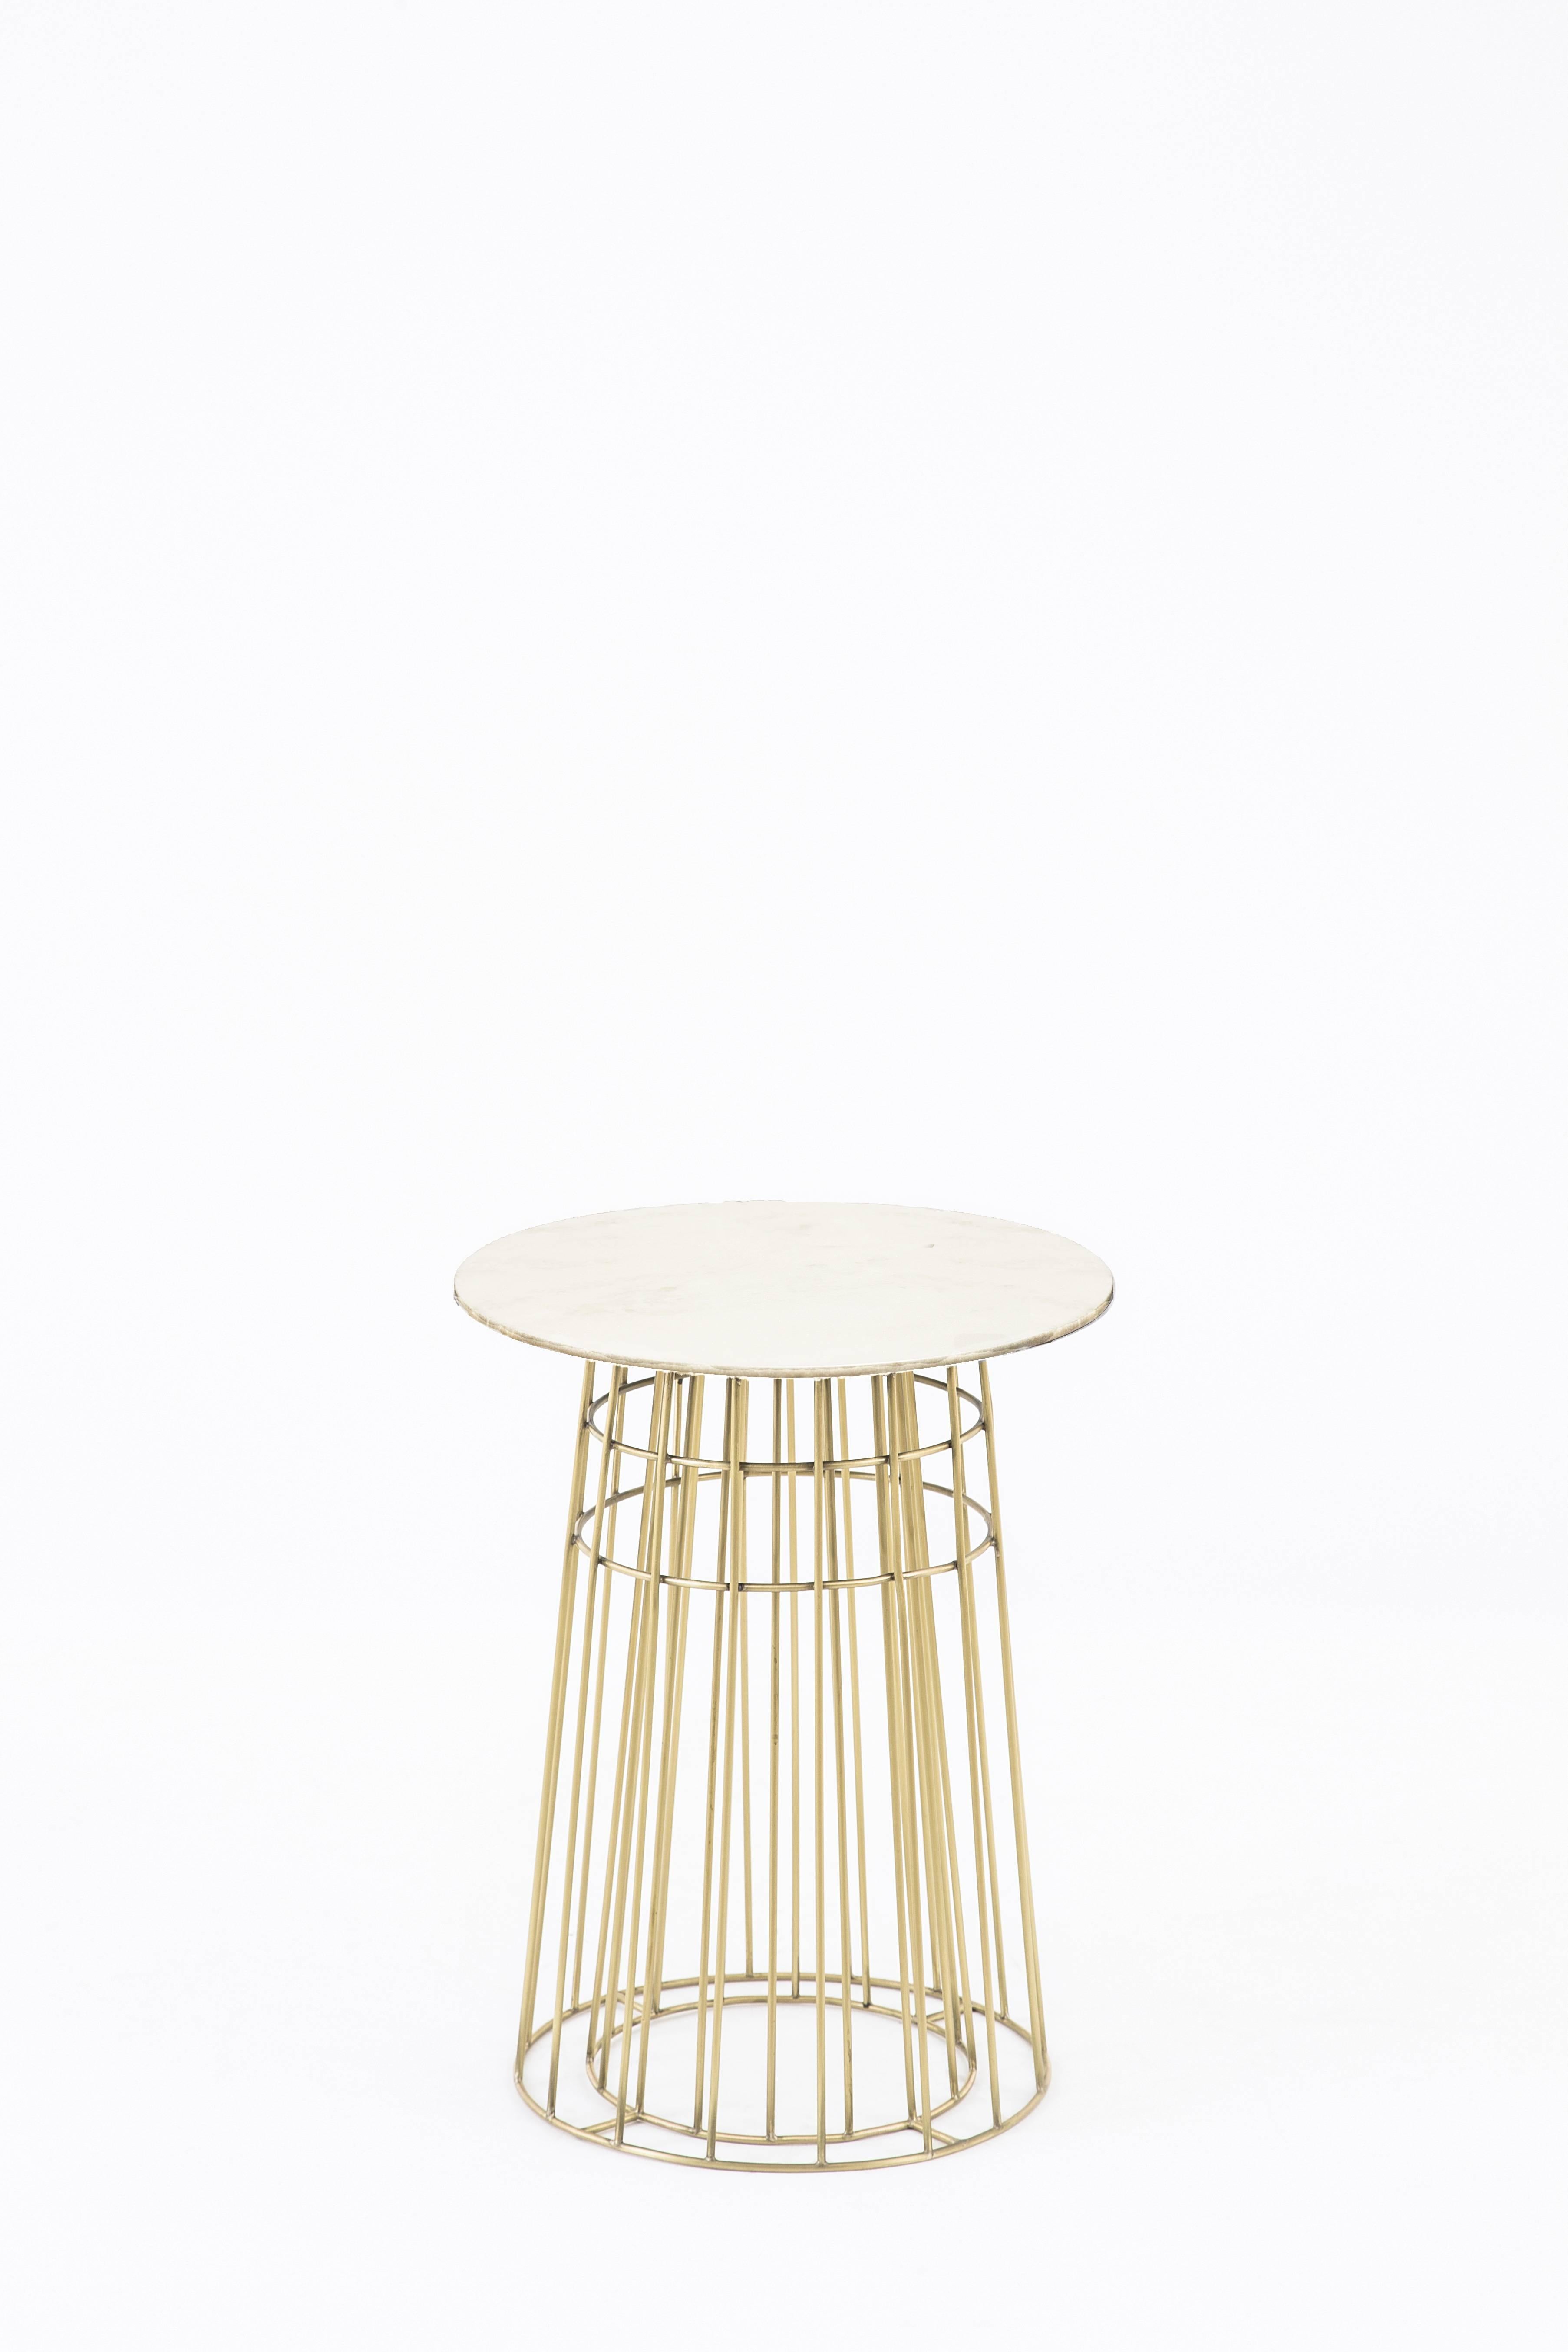 Contemporary Side Table or Tray Table in Brass and Cafe Baia Granite For Sale 2